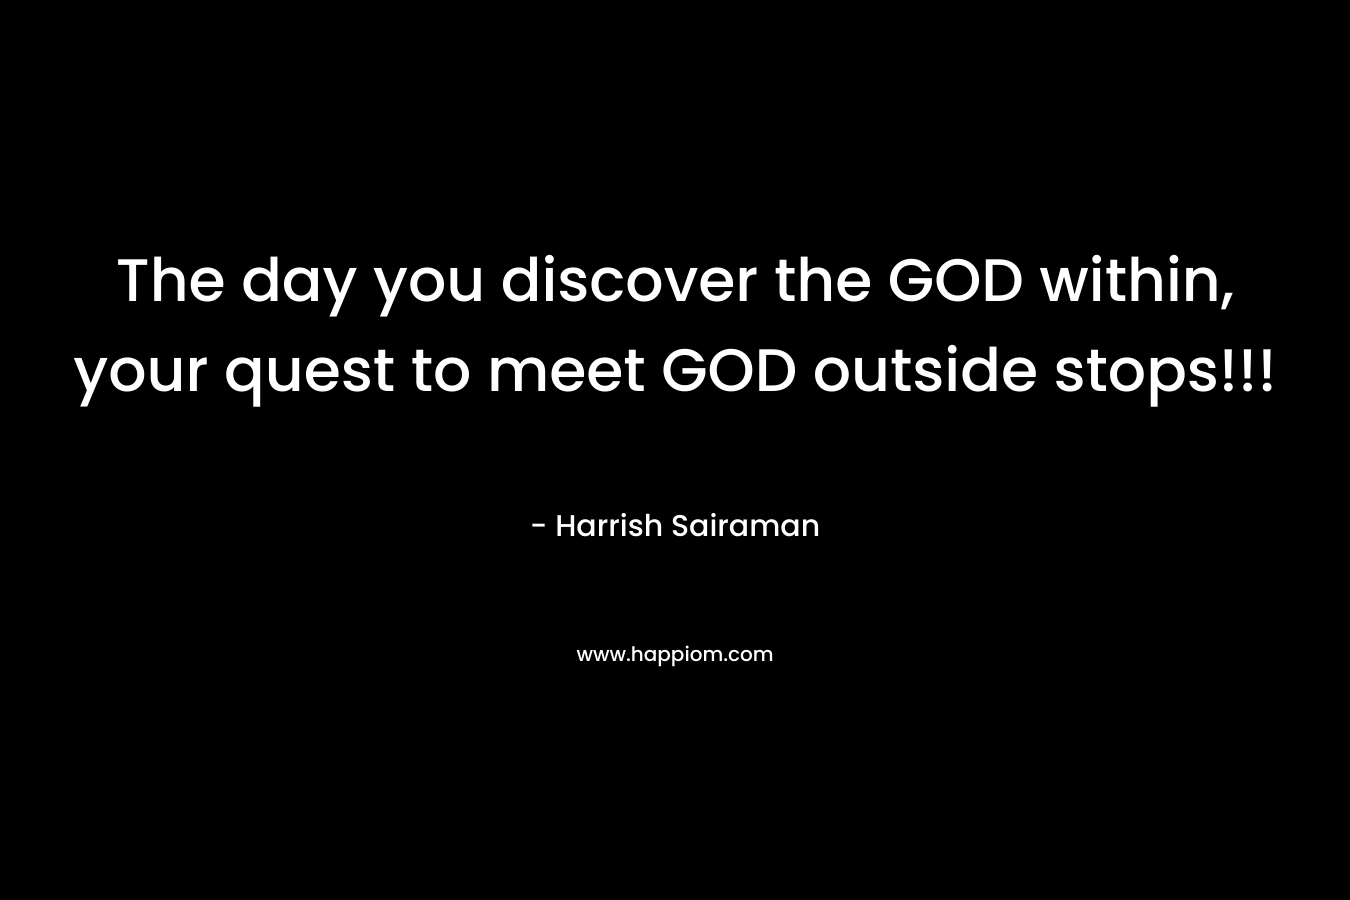 The day you discover the GOD within, your quest to meet GOD outside stops!!!